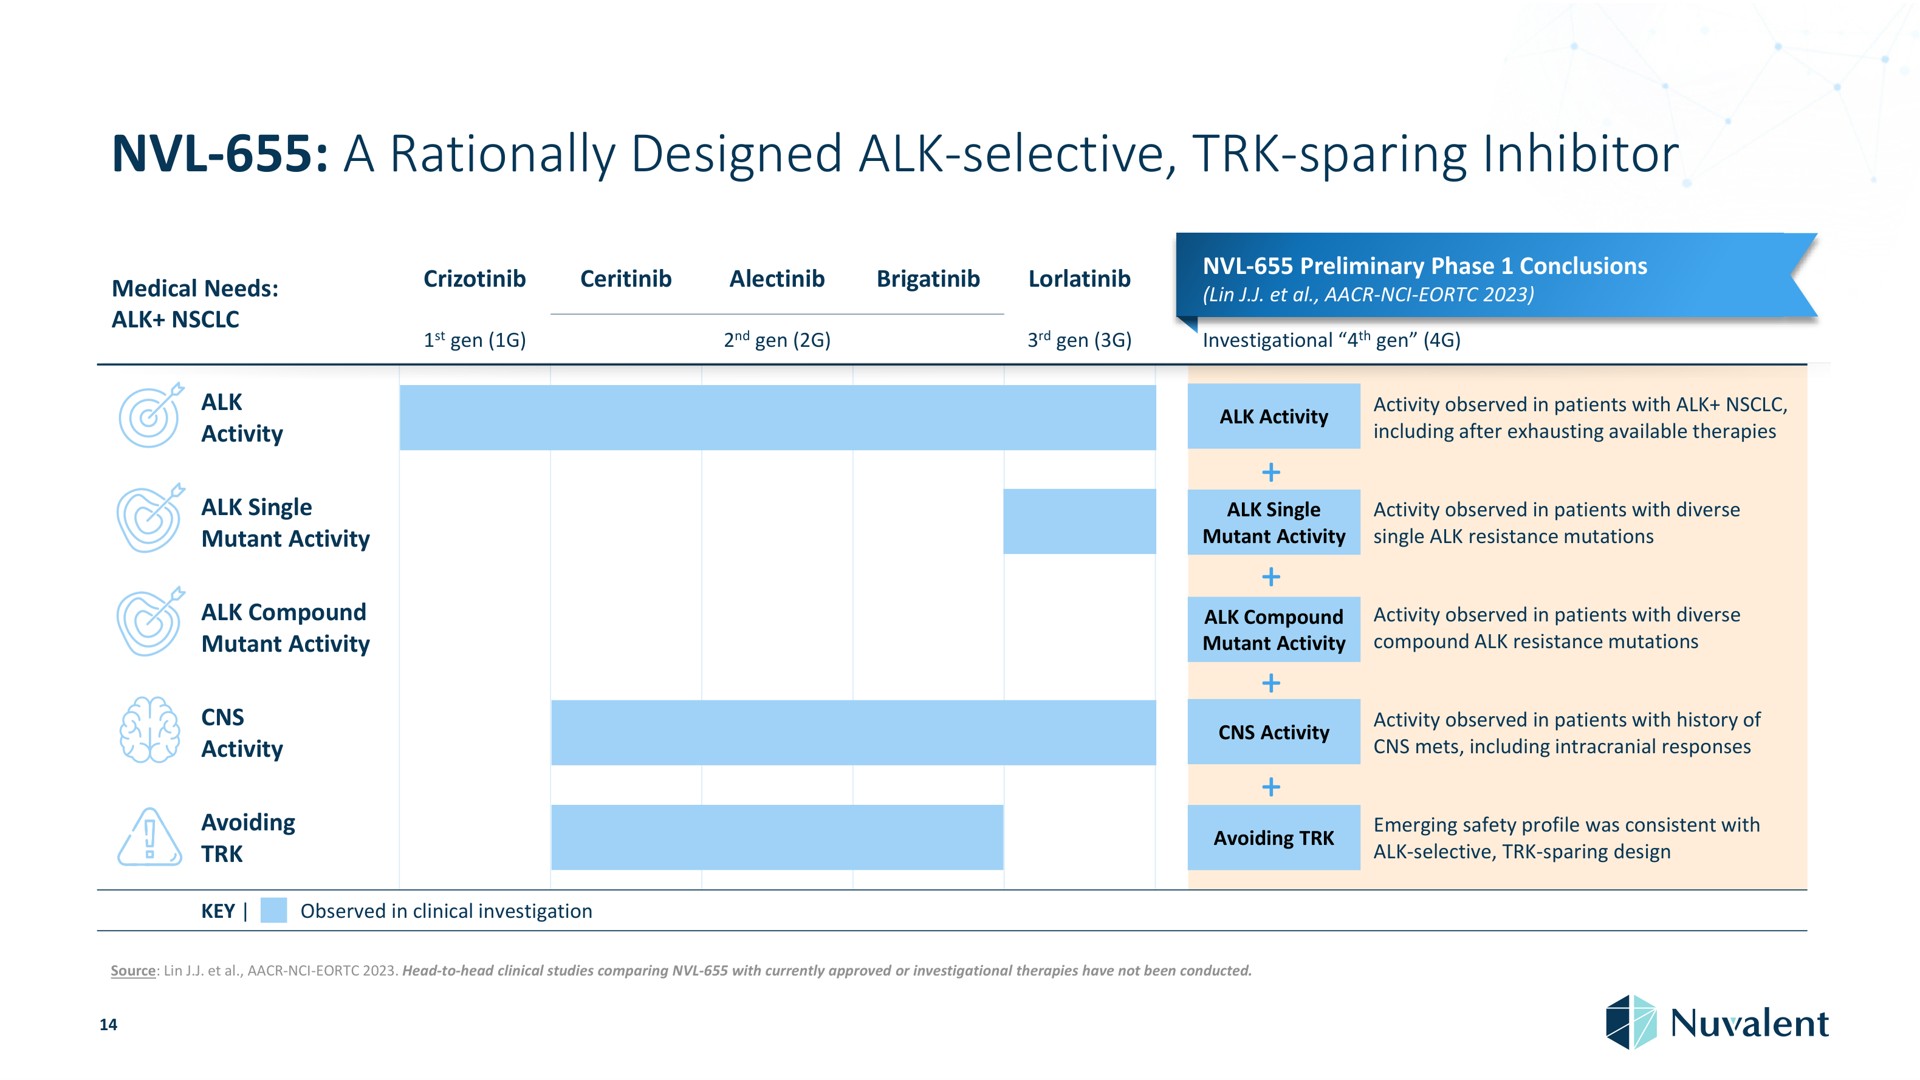 a rationally designed alk selective sparing inhibitor medical needs alk gen gen gen lin preliminary phase conclusions investigational gen alk activity alk single mutant activity alk compound mutant activity ens activity avoiding alk activity observed in patients with alk including after exhausting available therapies alk single mutant activity activity observed in patients with diverse single alk resistance mutations alk compound mutant activity activity observed in patients with diverse compound alk resistance mutations activity air avoiding activity observed in patients with history of including intracranial responses emerging safety profile was consistent with design key observed in clinical investigation source lin head to head clinical studies comparing with currently approved or investigational therapies have not been conducted | Nuvalent